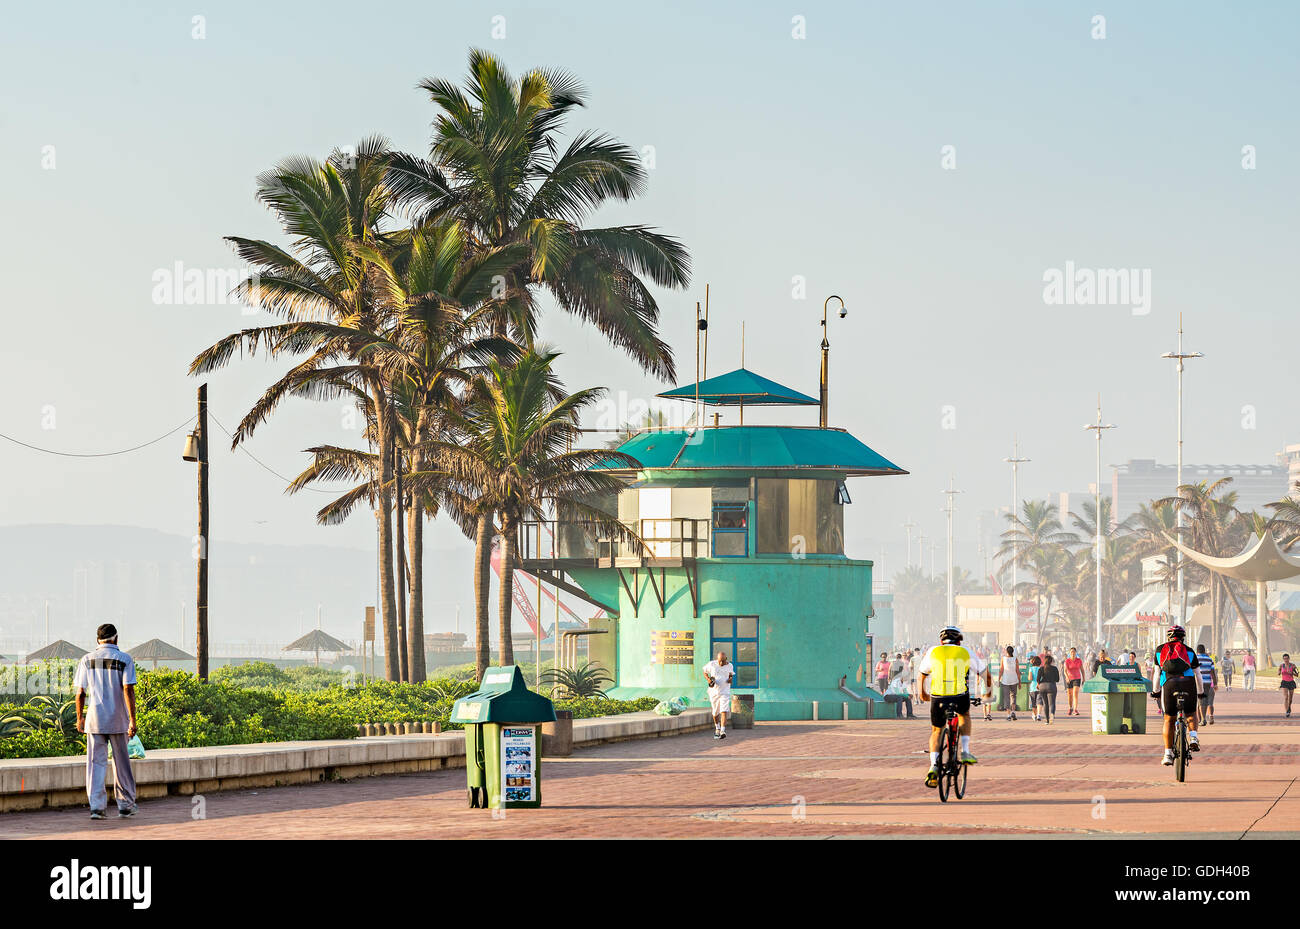 DURBAN, SOUTH AFRICA - APRIL 16, 2016: Locals and tourists near the lifesaver's station on The Golden Mile promenade Stock Photo